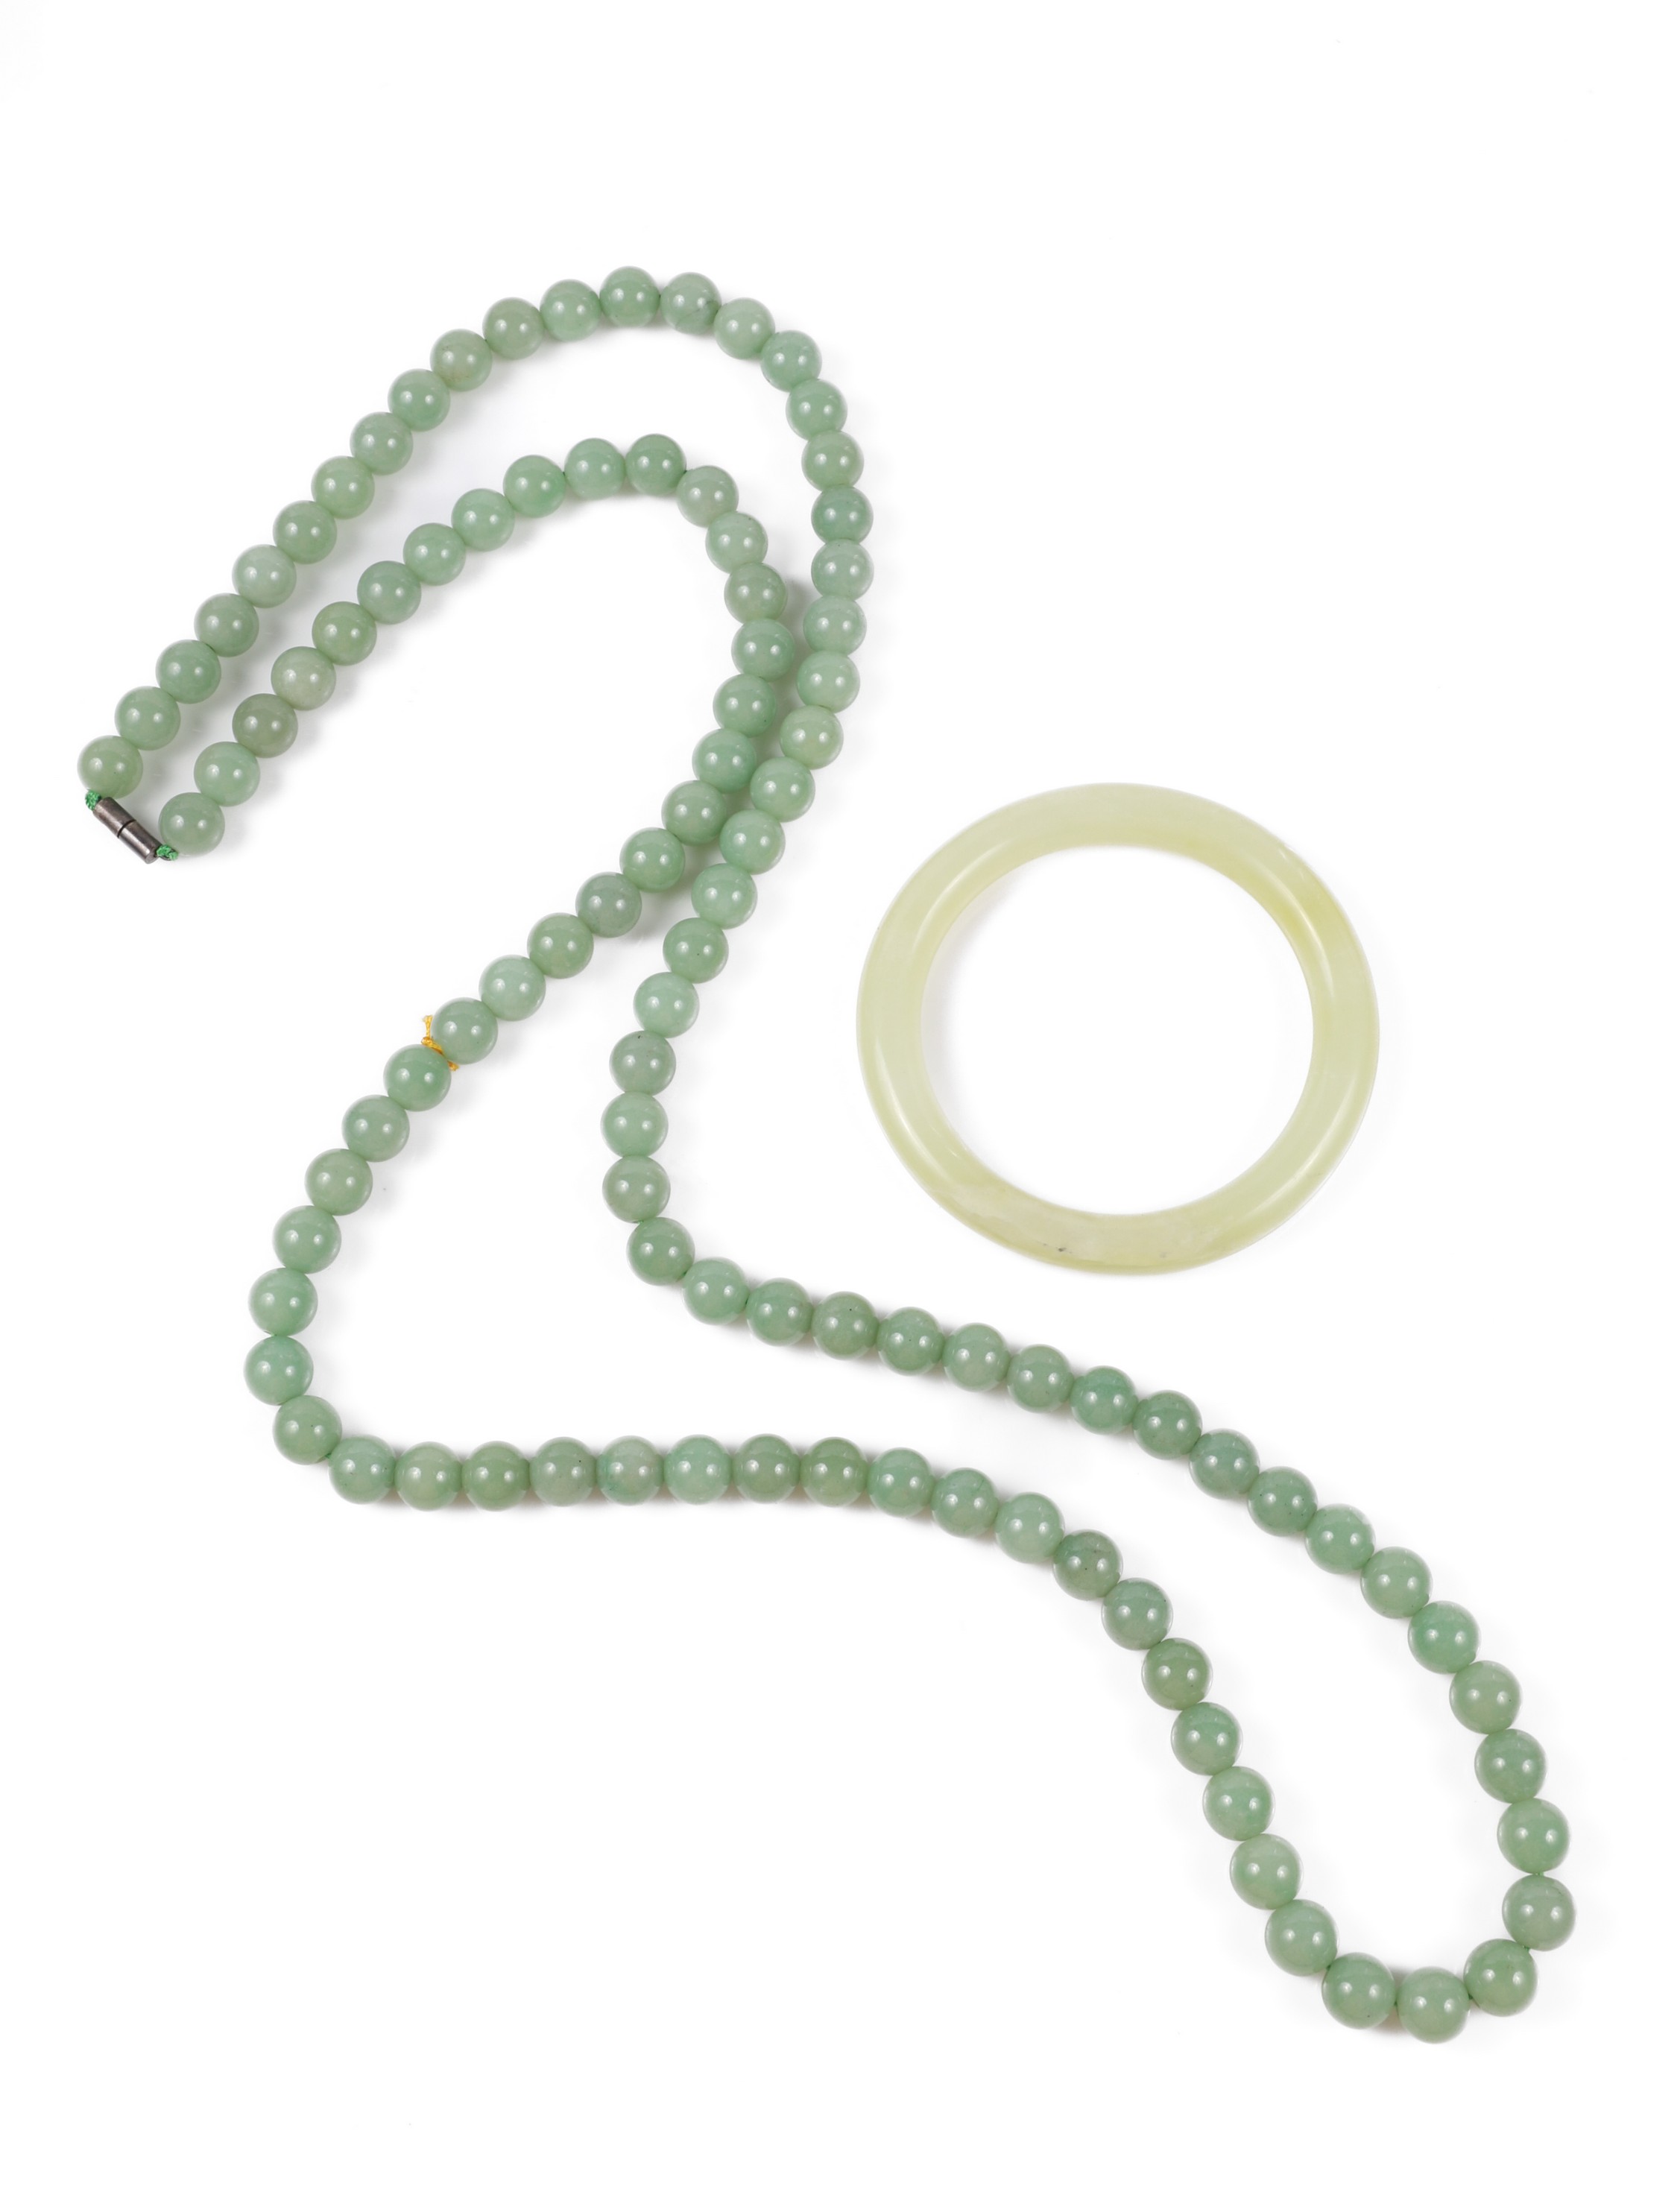 Jade style necklace and bangle,